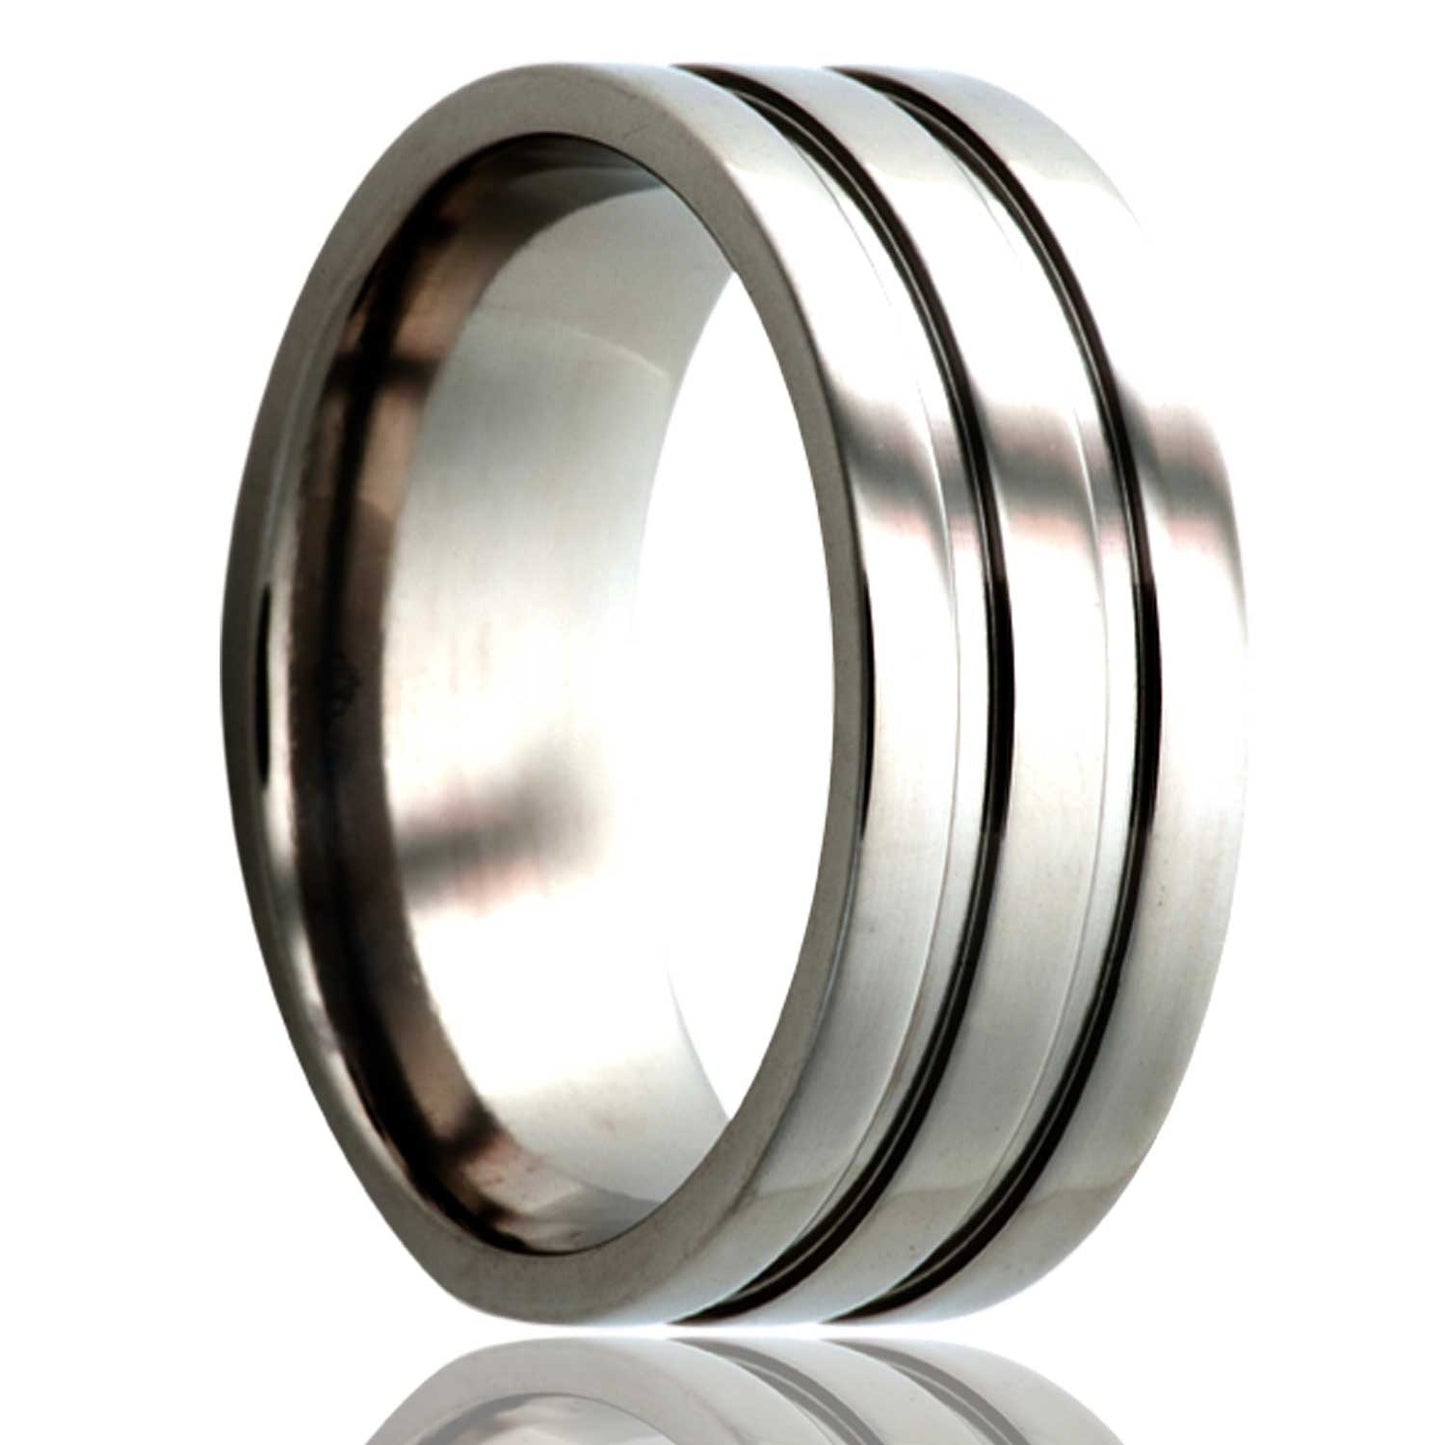 A dual grooved titanium wedding band displayed on a neutral white background.